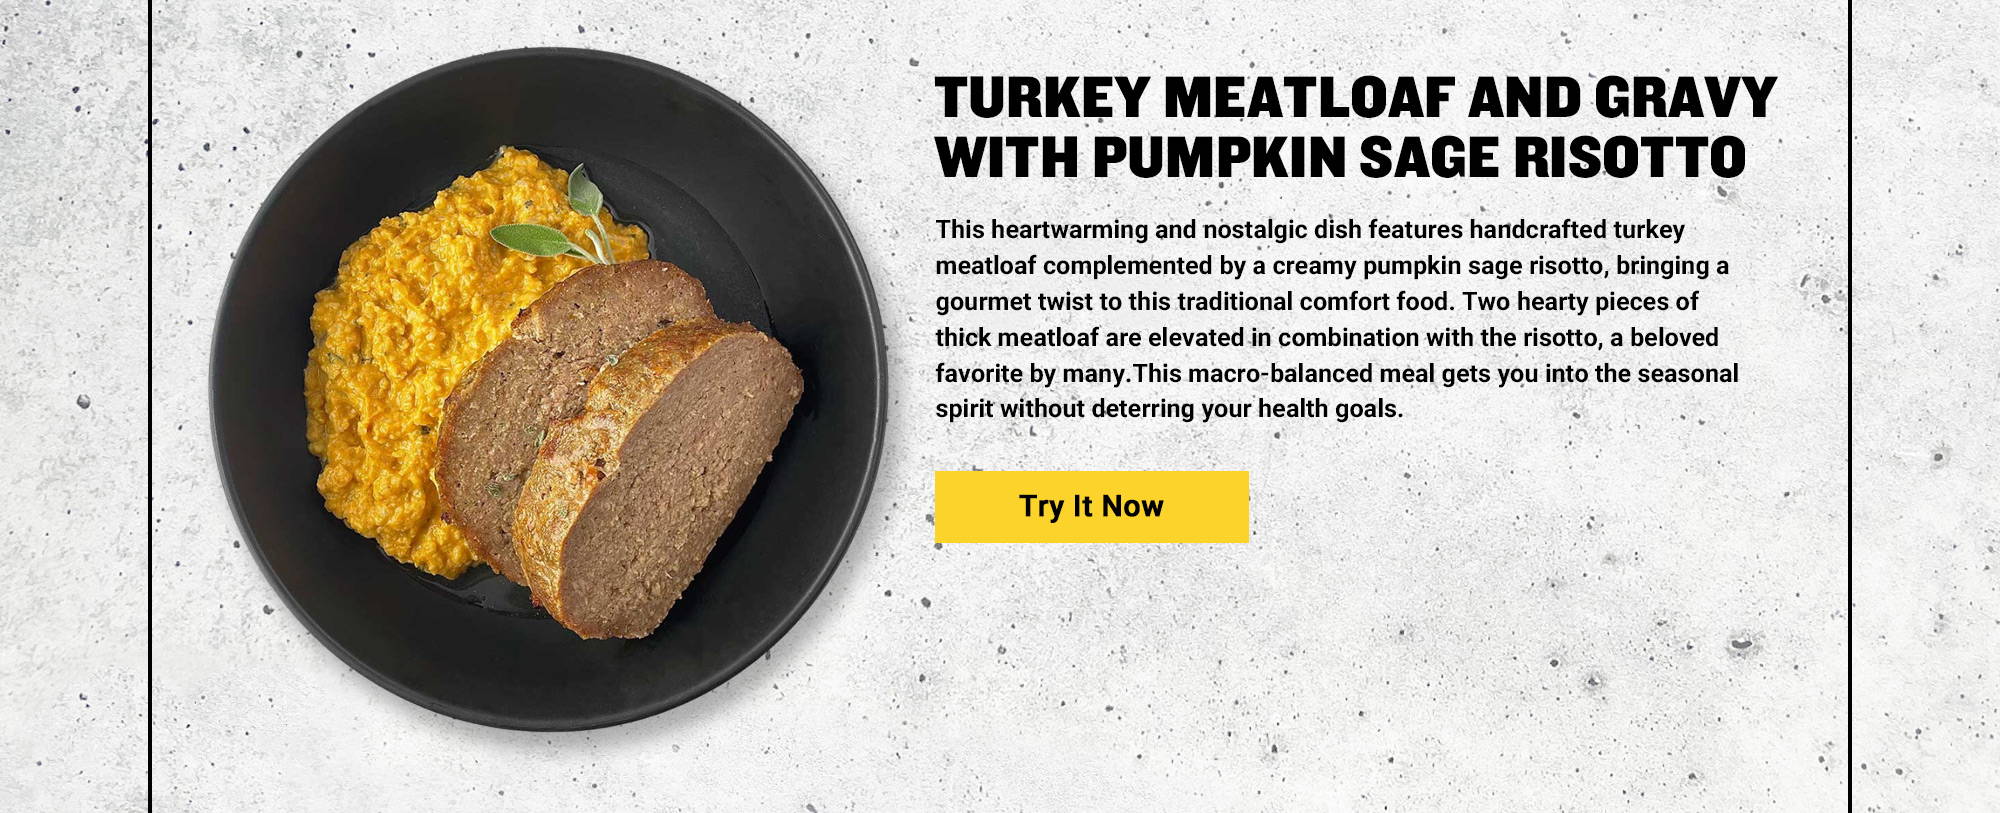 AIP. Friendly Turkey Meatloaf and Gravy with Pumpkin Sage Risotto